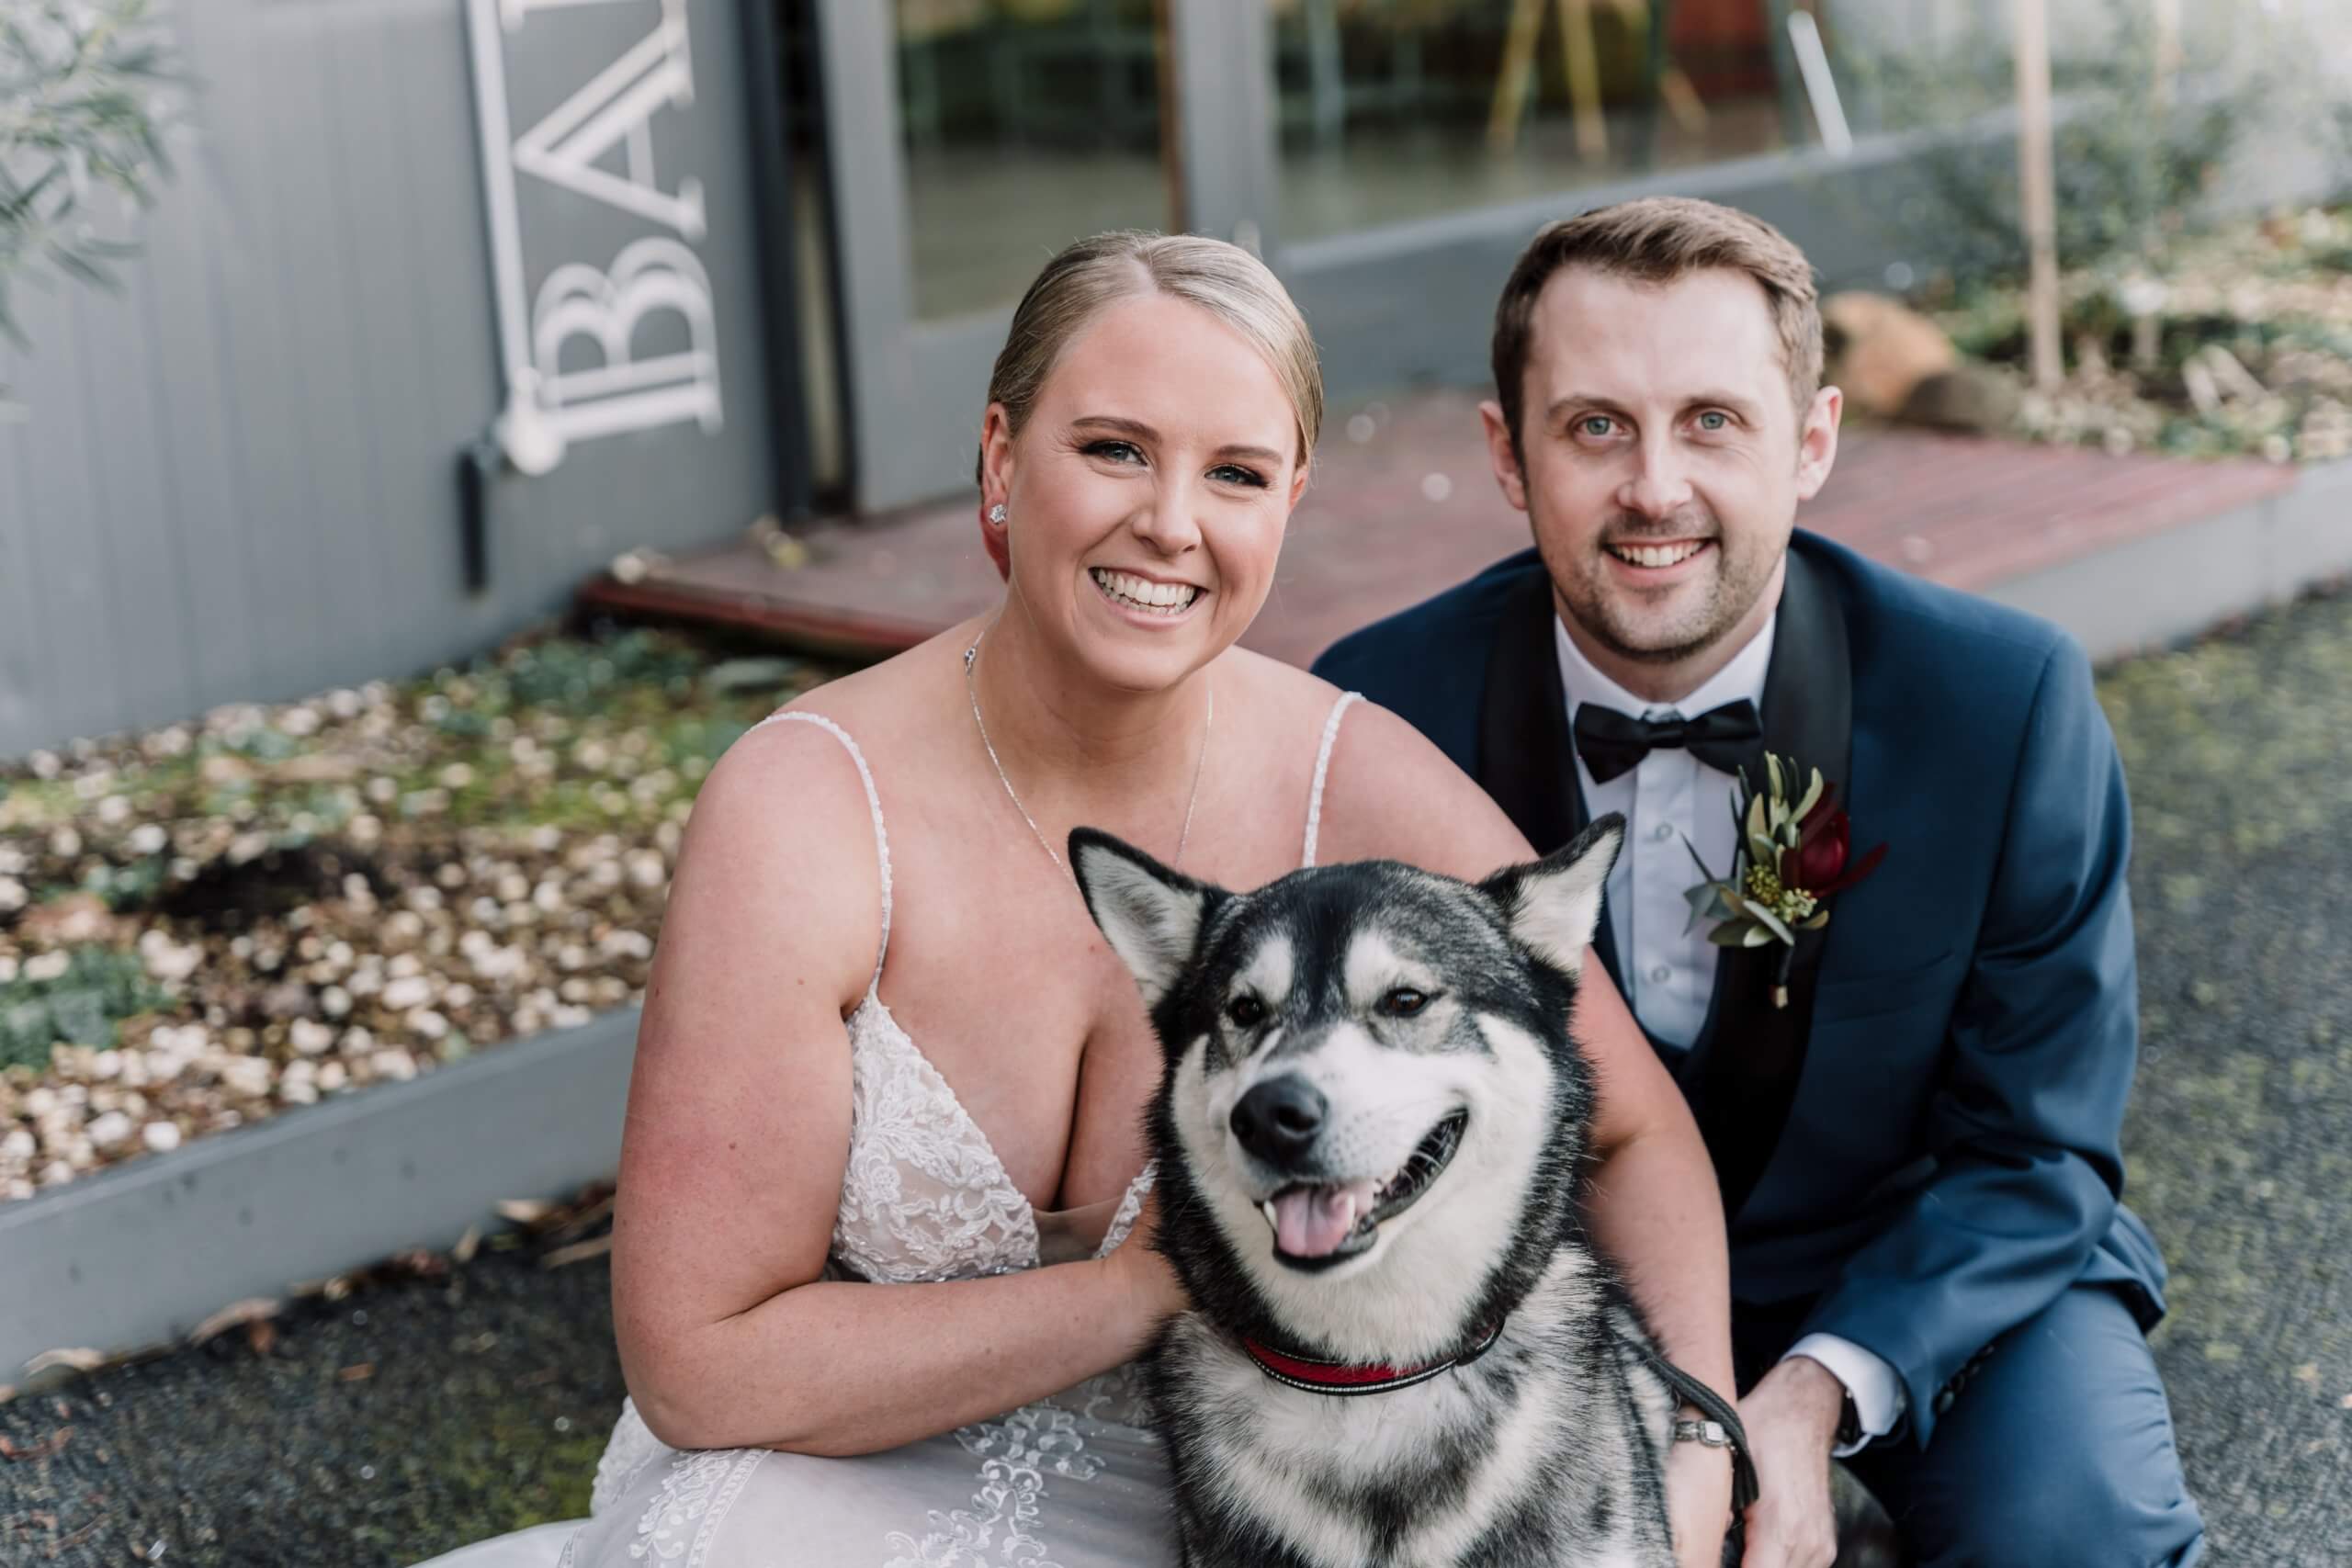 Bride and groom scoots to the ground to have a picture taken with their pet husky.